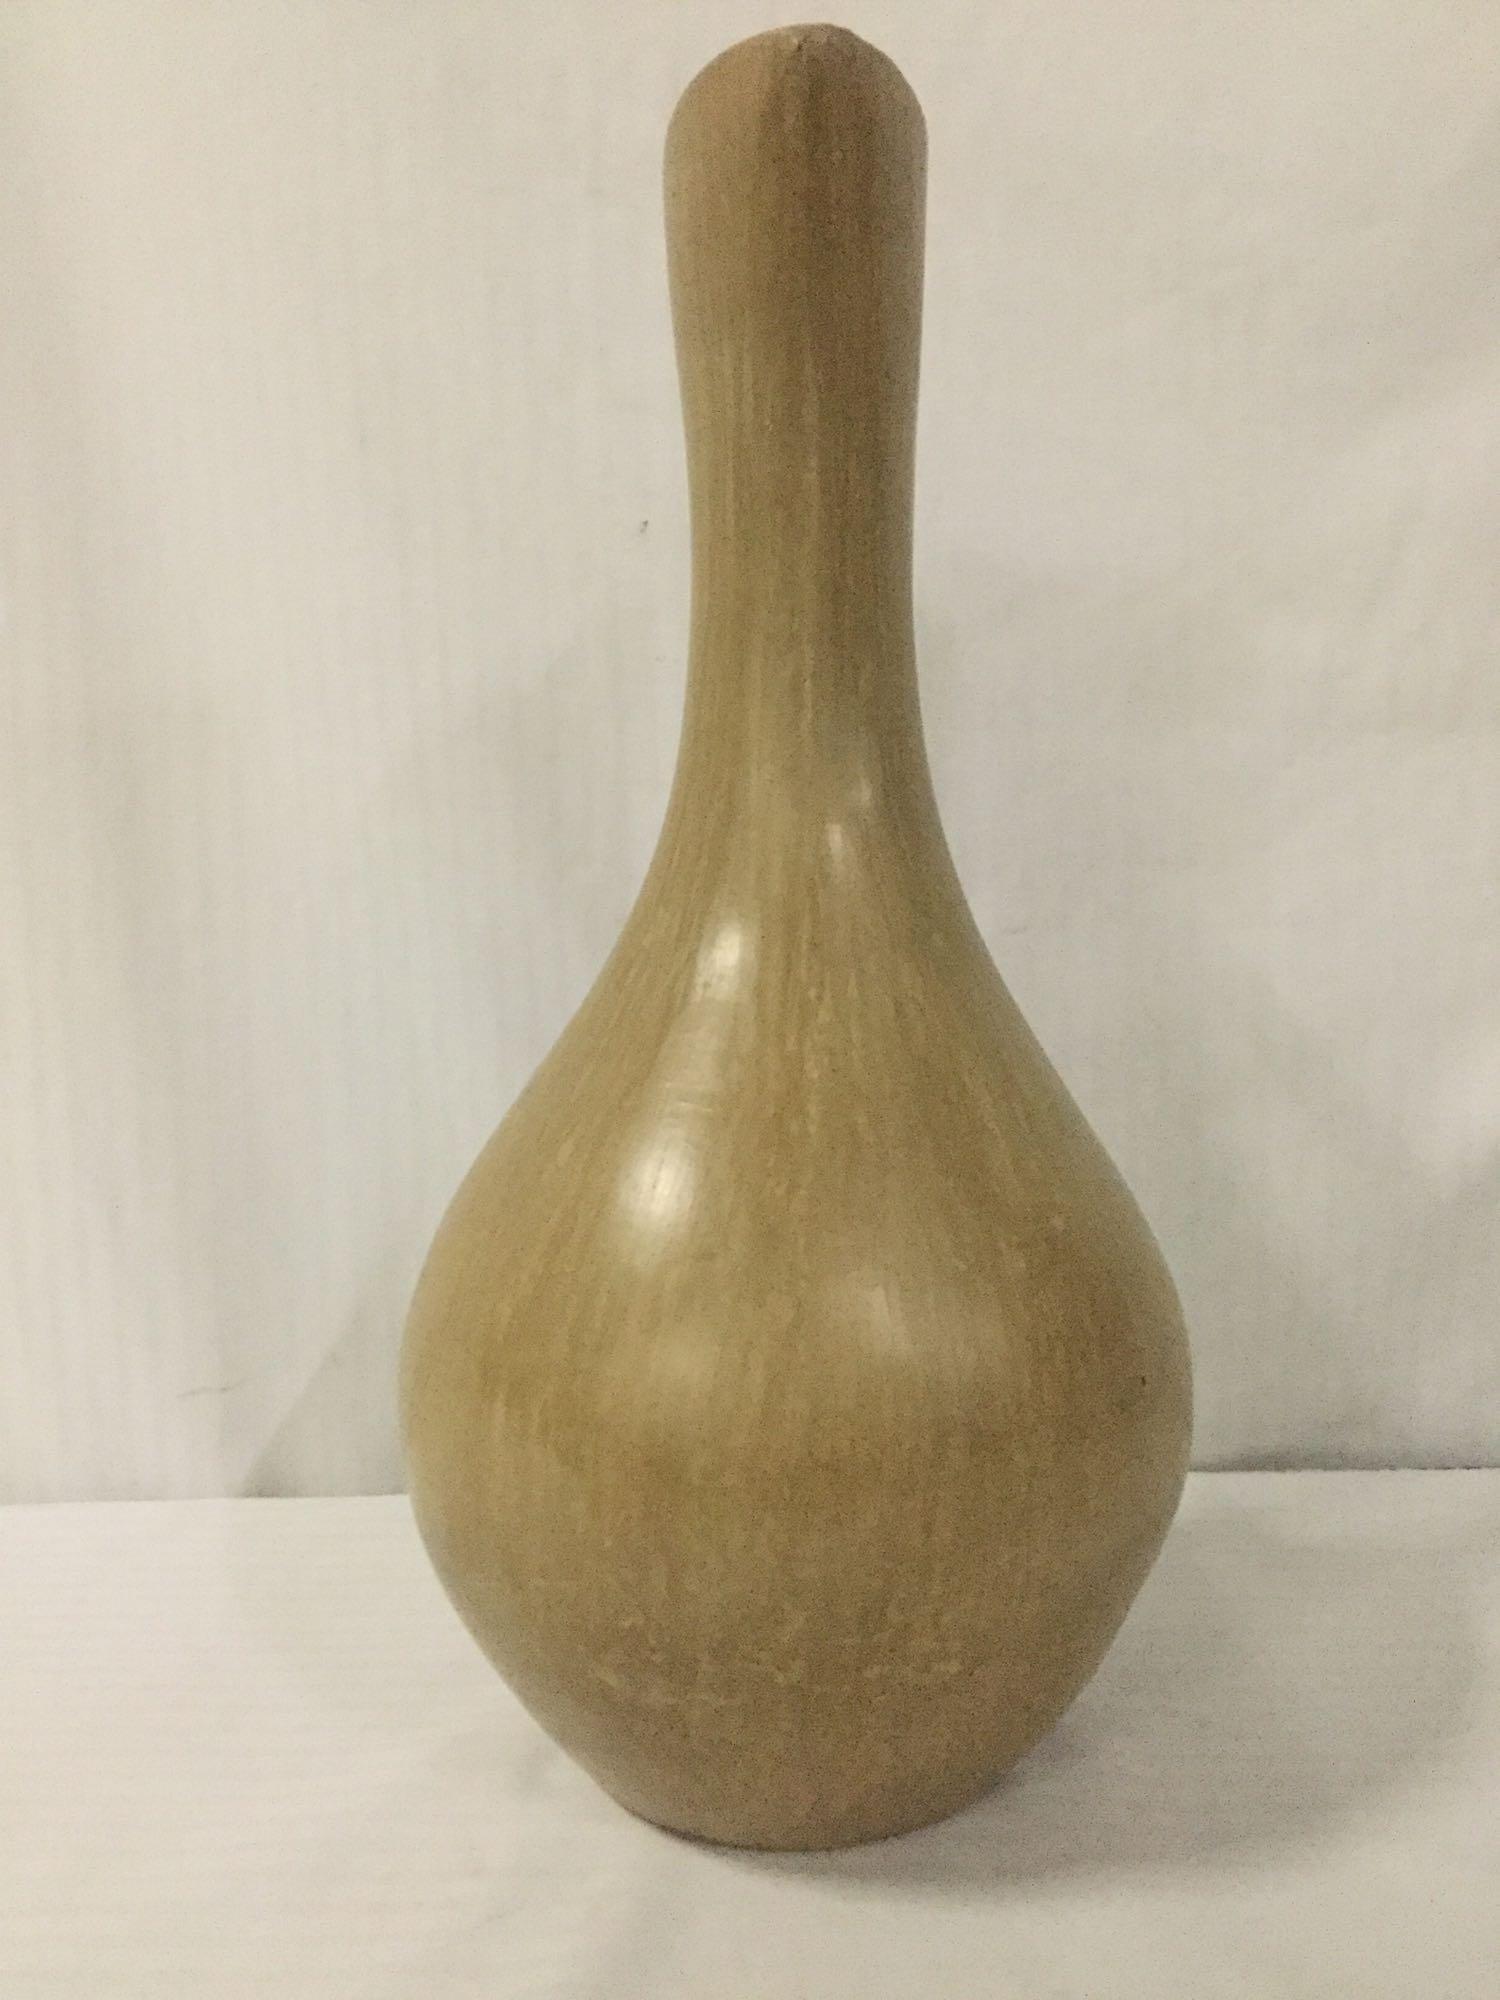 Tall smooth ceramic pitcher, unsigned, approx. 10x10x20.5 inches.